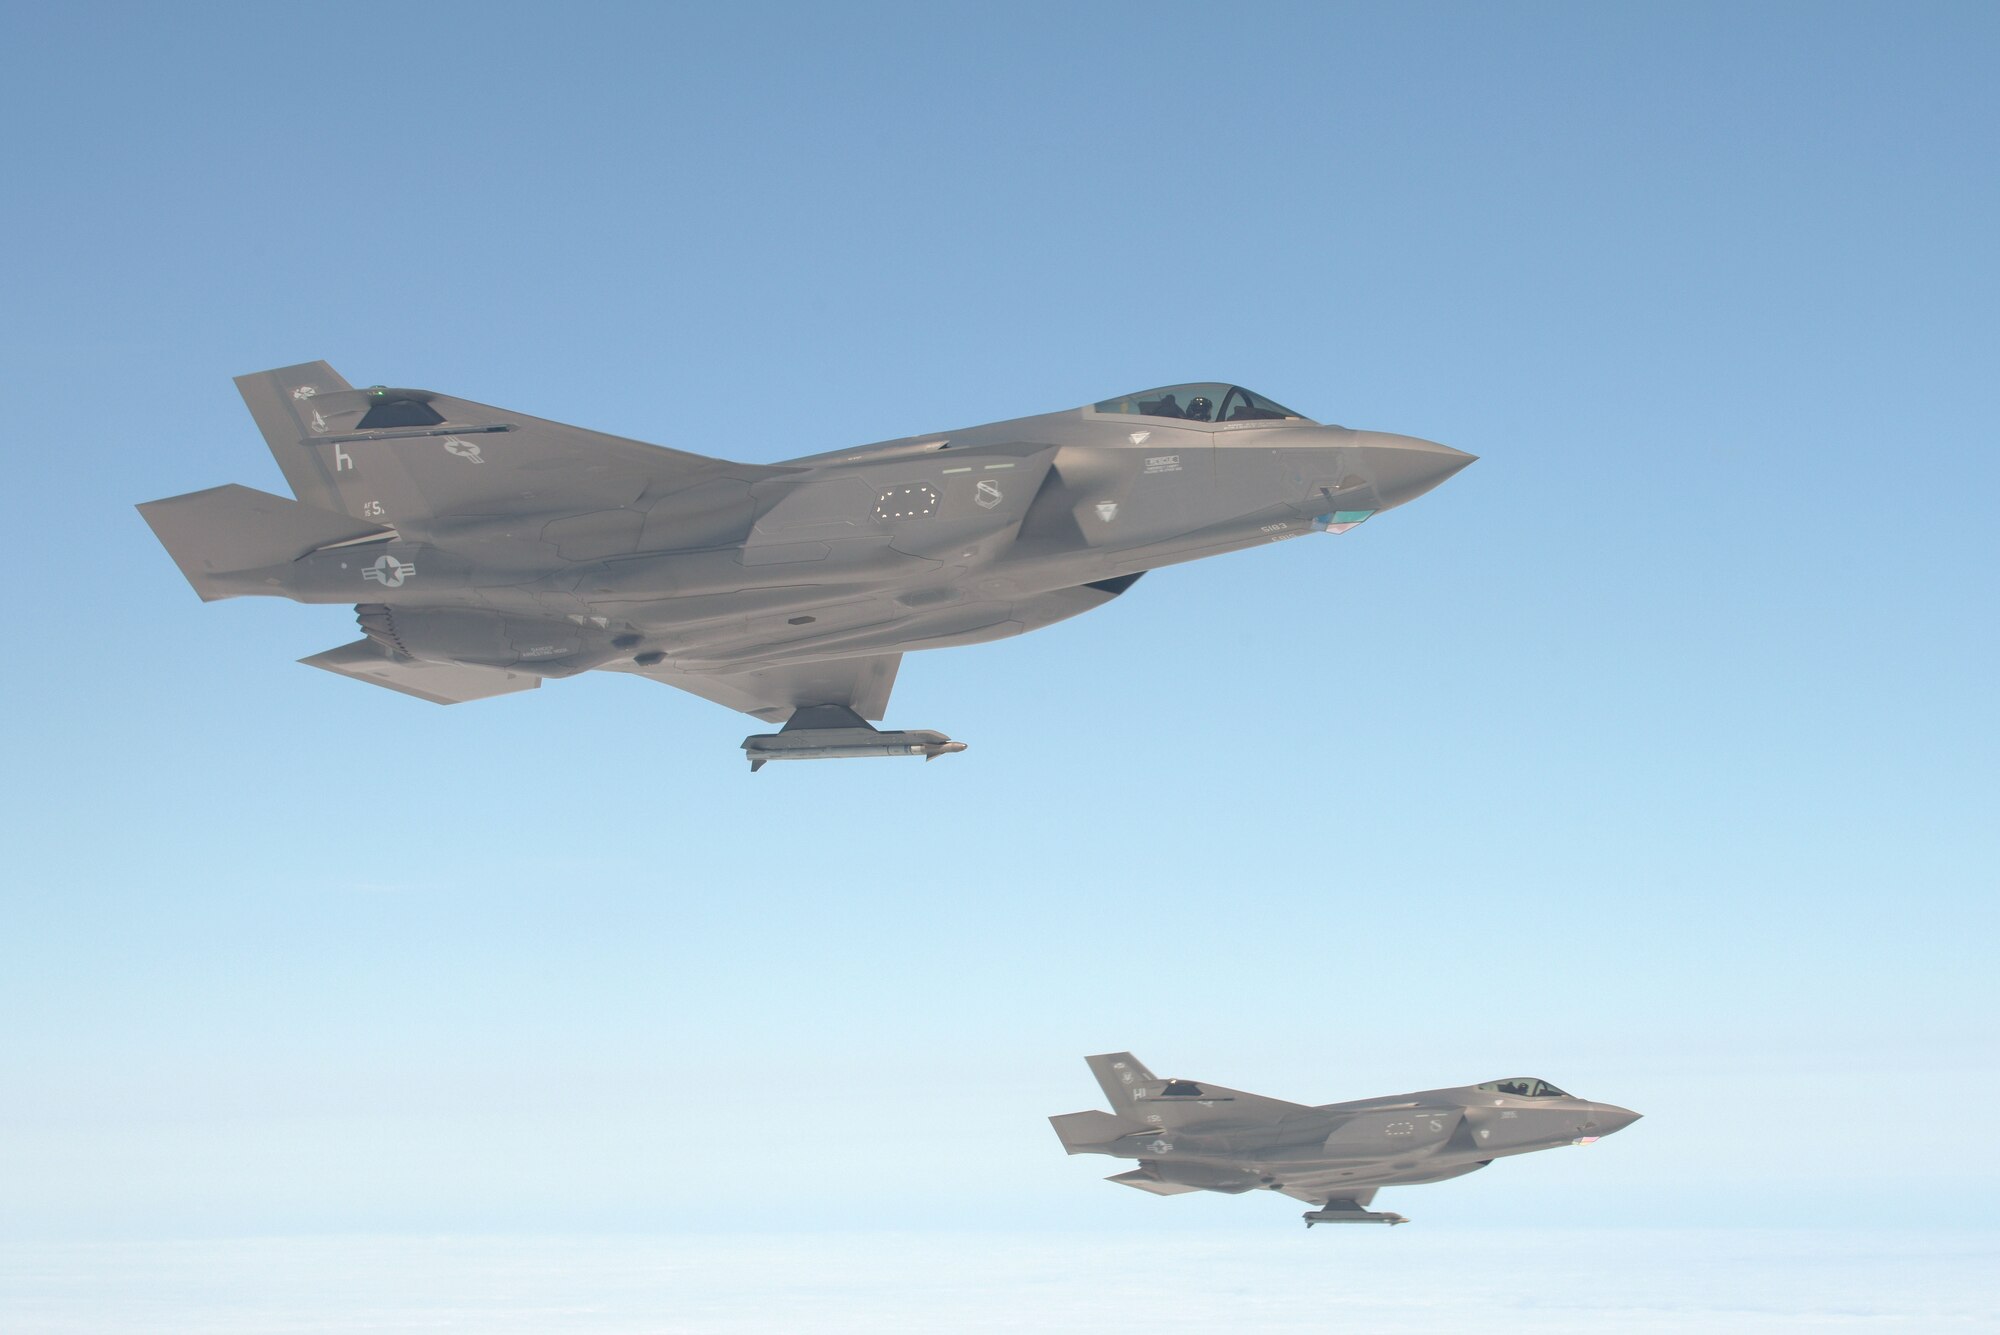 U.S. Air Force F-35A Lightning IIs, assigned to the 388th Fighter Wing, fly alongside a U.S. Air Force KC-135 Stratotanker, assigned to RAF Mildenhall, England, during Exercise Point Blank over the North Sea, June 27, 2019. Exercise Point Blank included fourth and fifth-generation integration of air interdiction, offensive counter air, personnel recovery, dissimilar air combat maneuvering, along with planning and assessment. (U.S. Air Force photo by Senior Airman Benjamin Cooper)